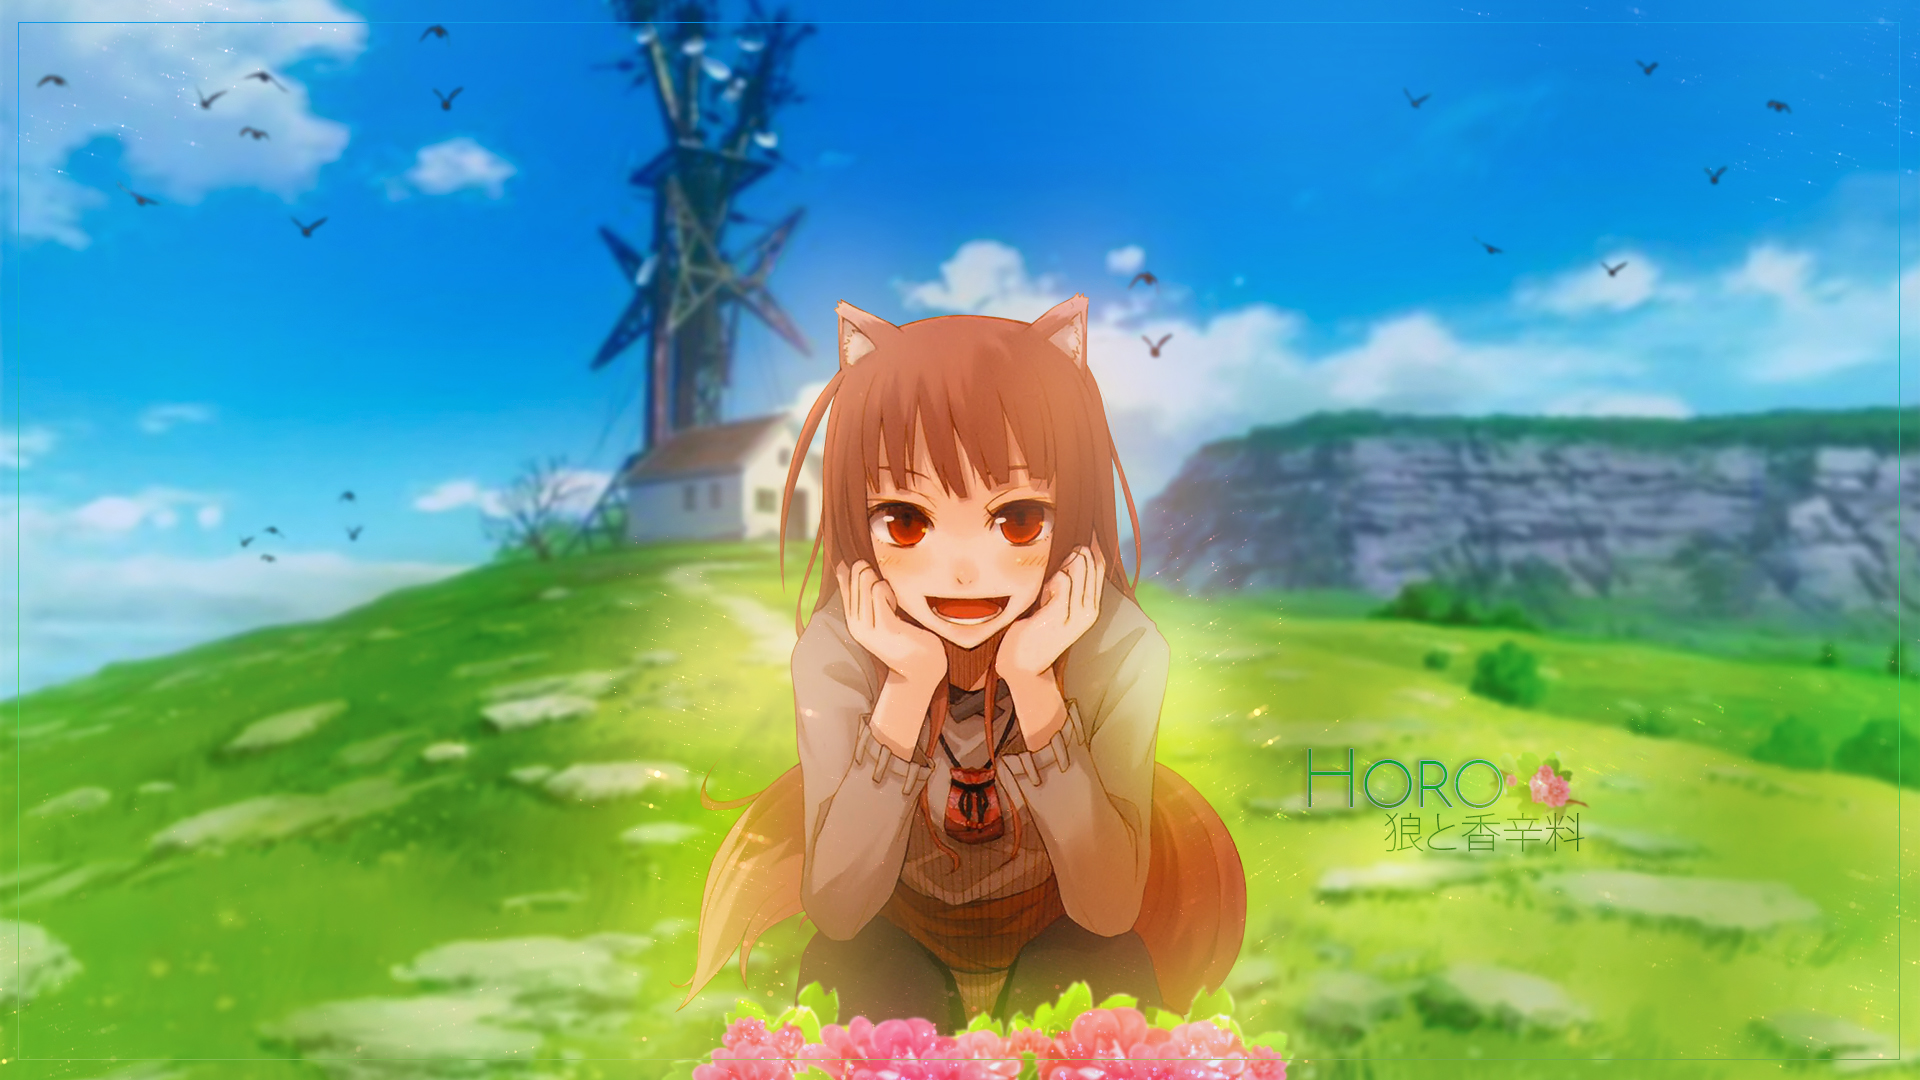 Spice And Wolf Holo Spice And Wolf 1920x1080